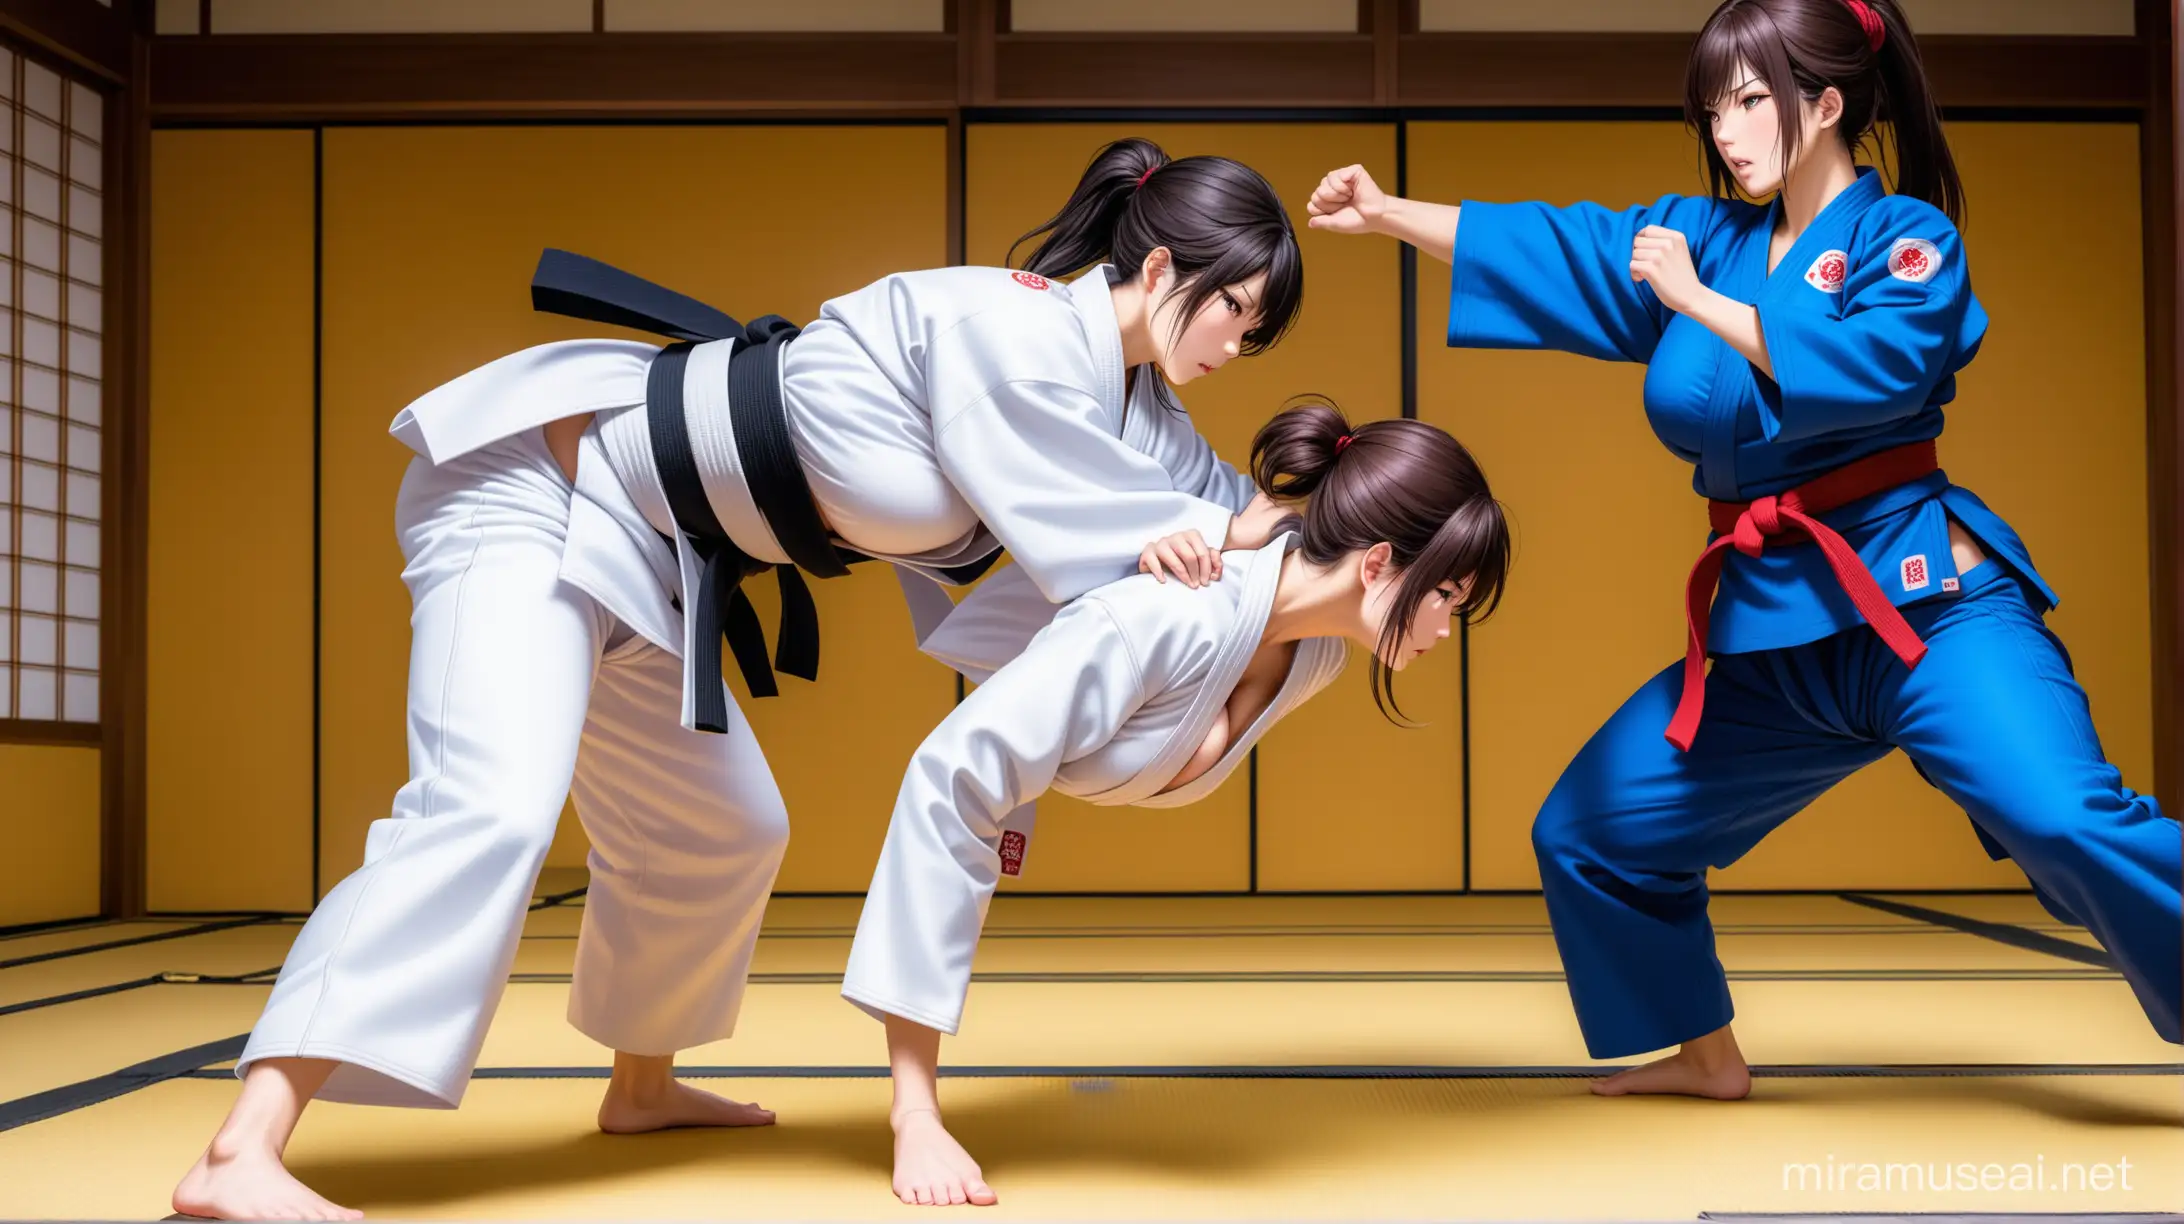 Intense Judo Duel Colossal Japanese Models Clash in Close Combat